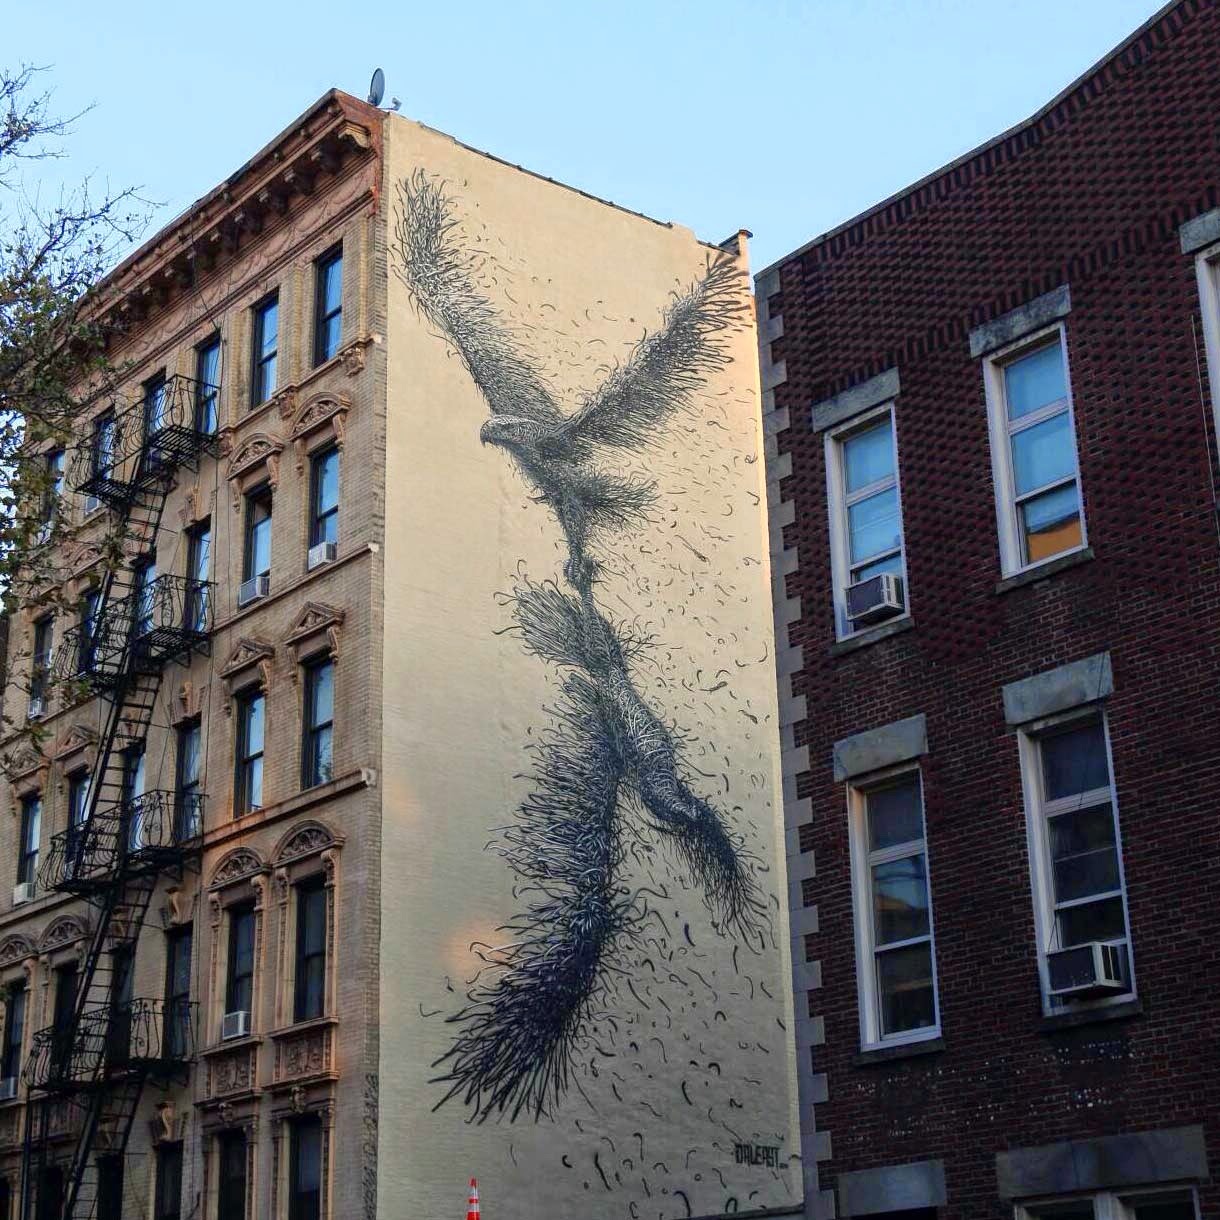 “DALeast New Mural - New York City, USA
Street Art News, streetartnews.net
The Chinese painter DALeast is currently in New York City where he just finished working on this new mural in Manhattan.
As usual with the Cape-Town-based muralist, he quickly...